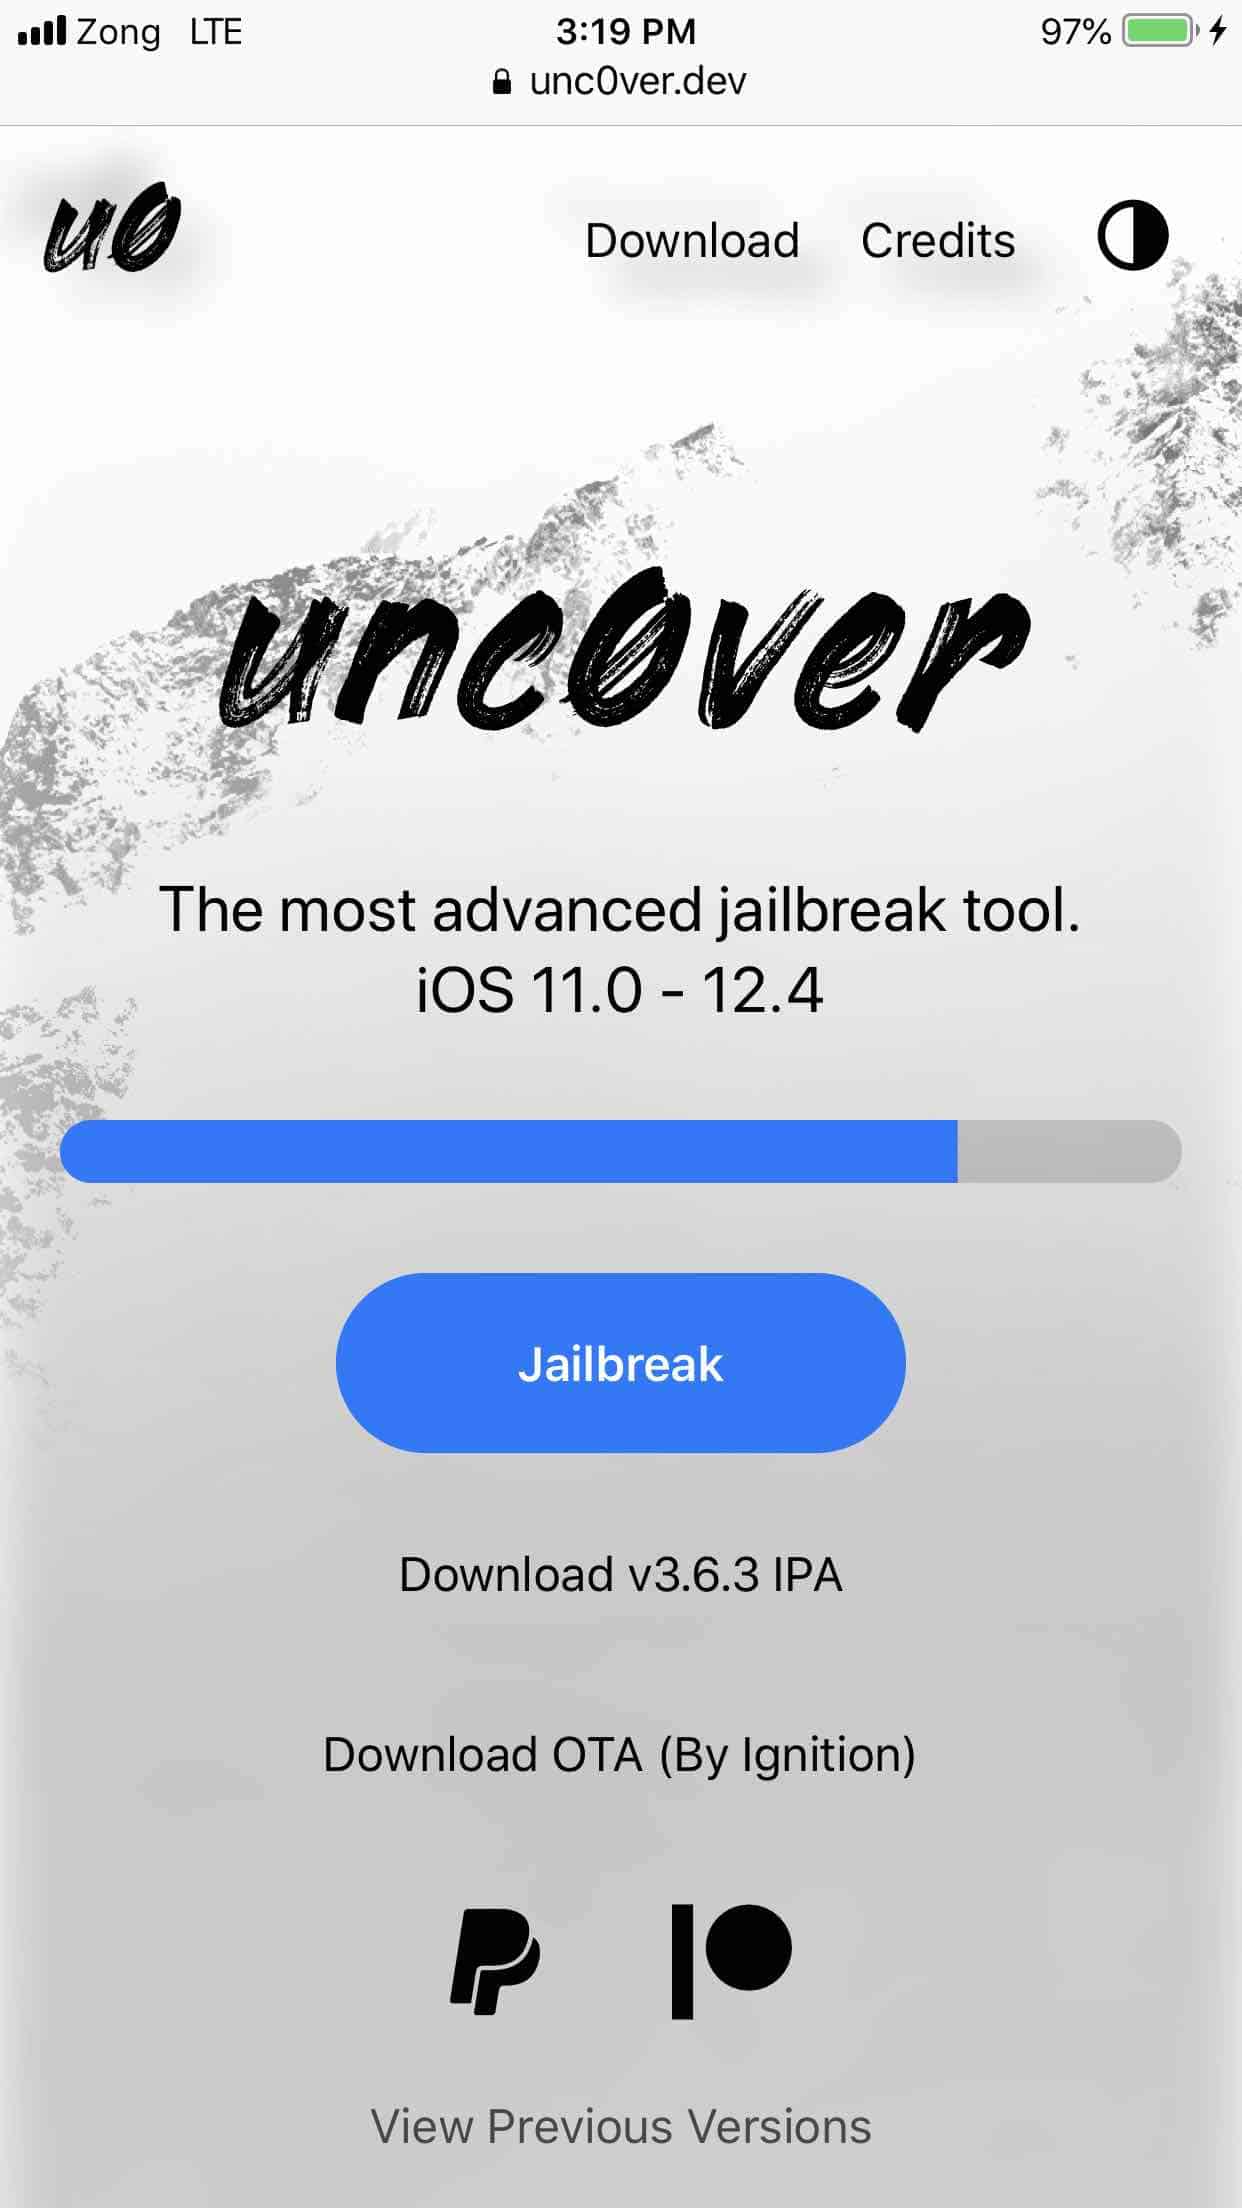 How to jailbreak without pc